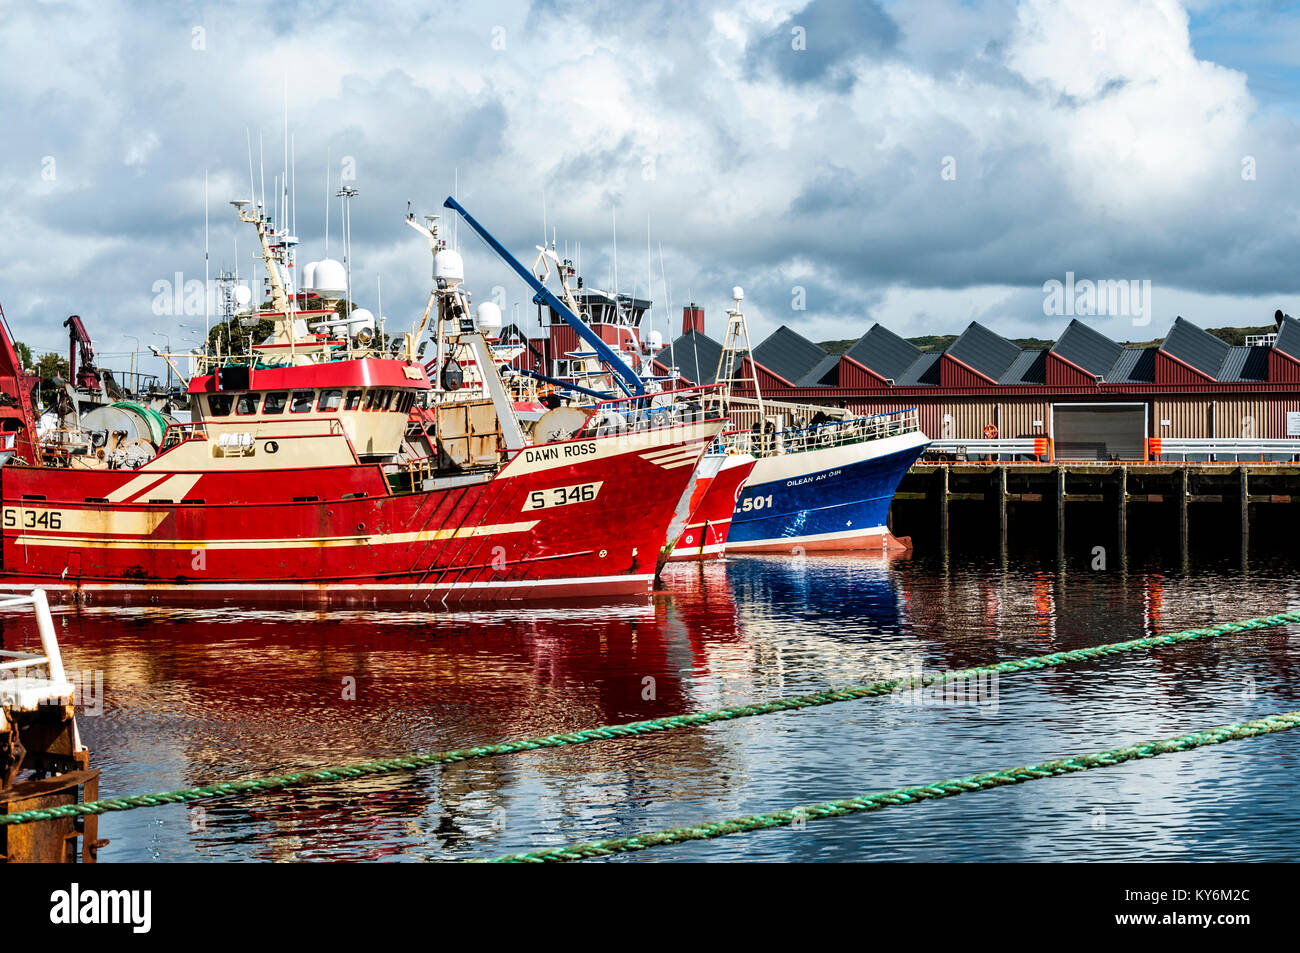 Fischtrawler in Cröffelbach Harbor County Donegal, Irland Stockfoto